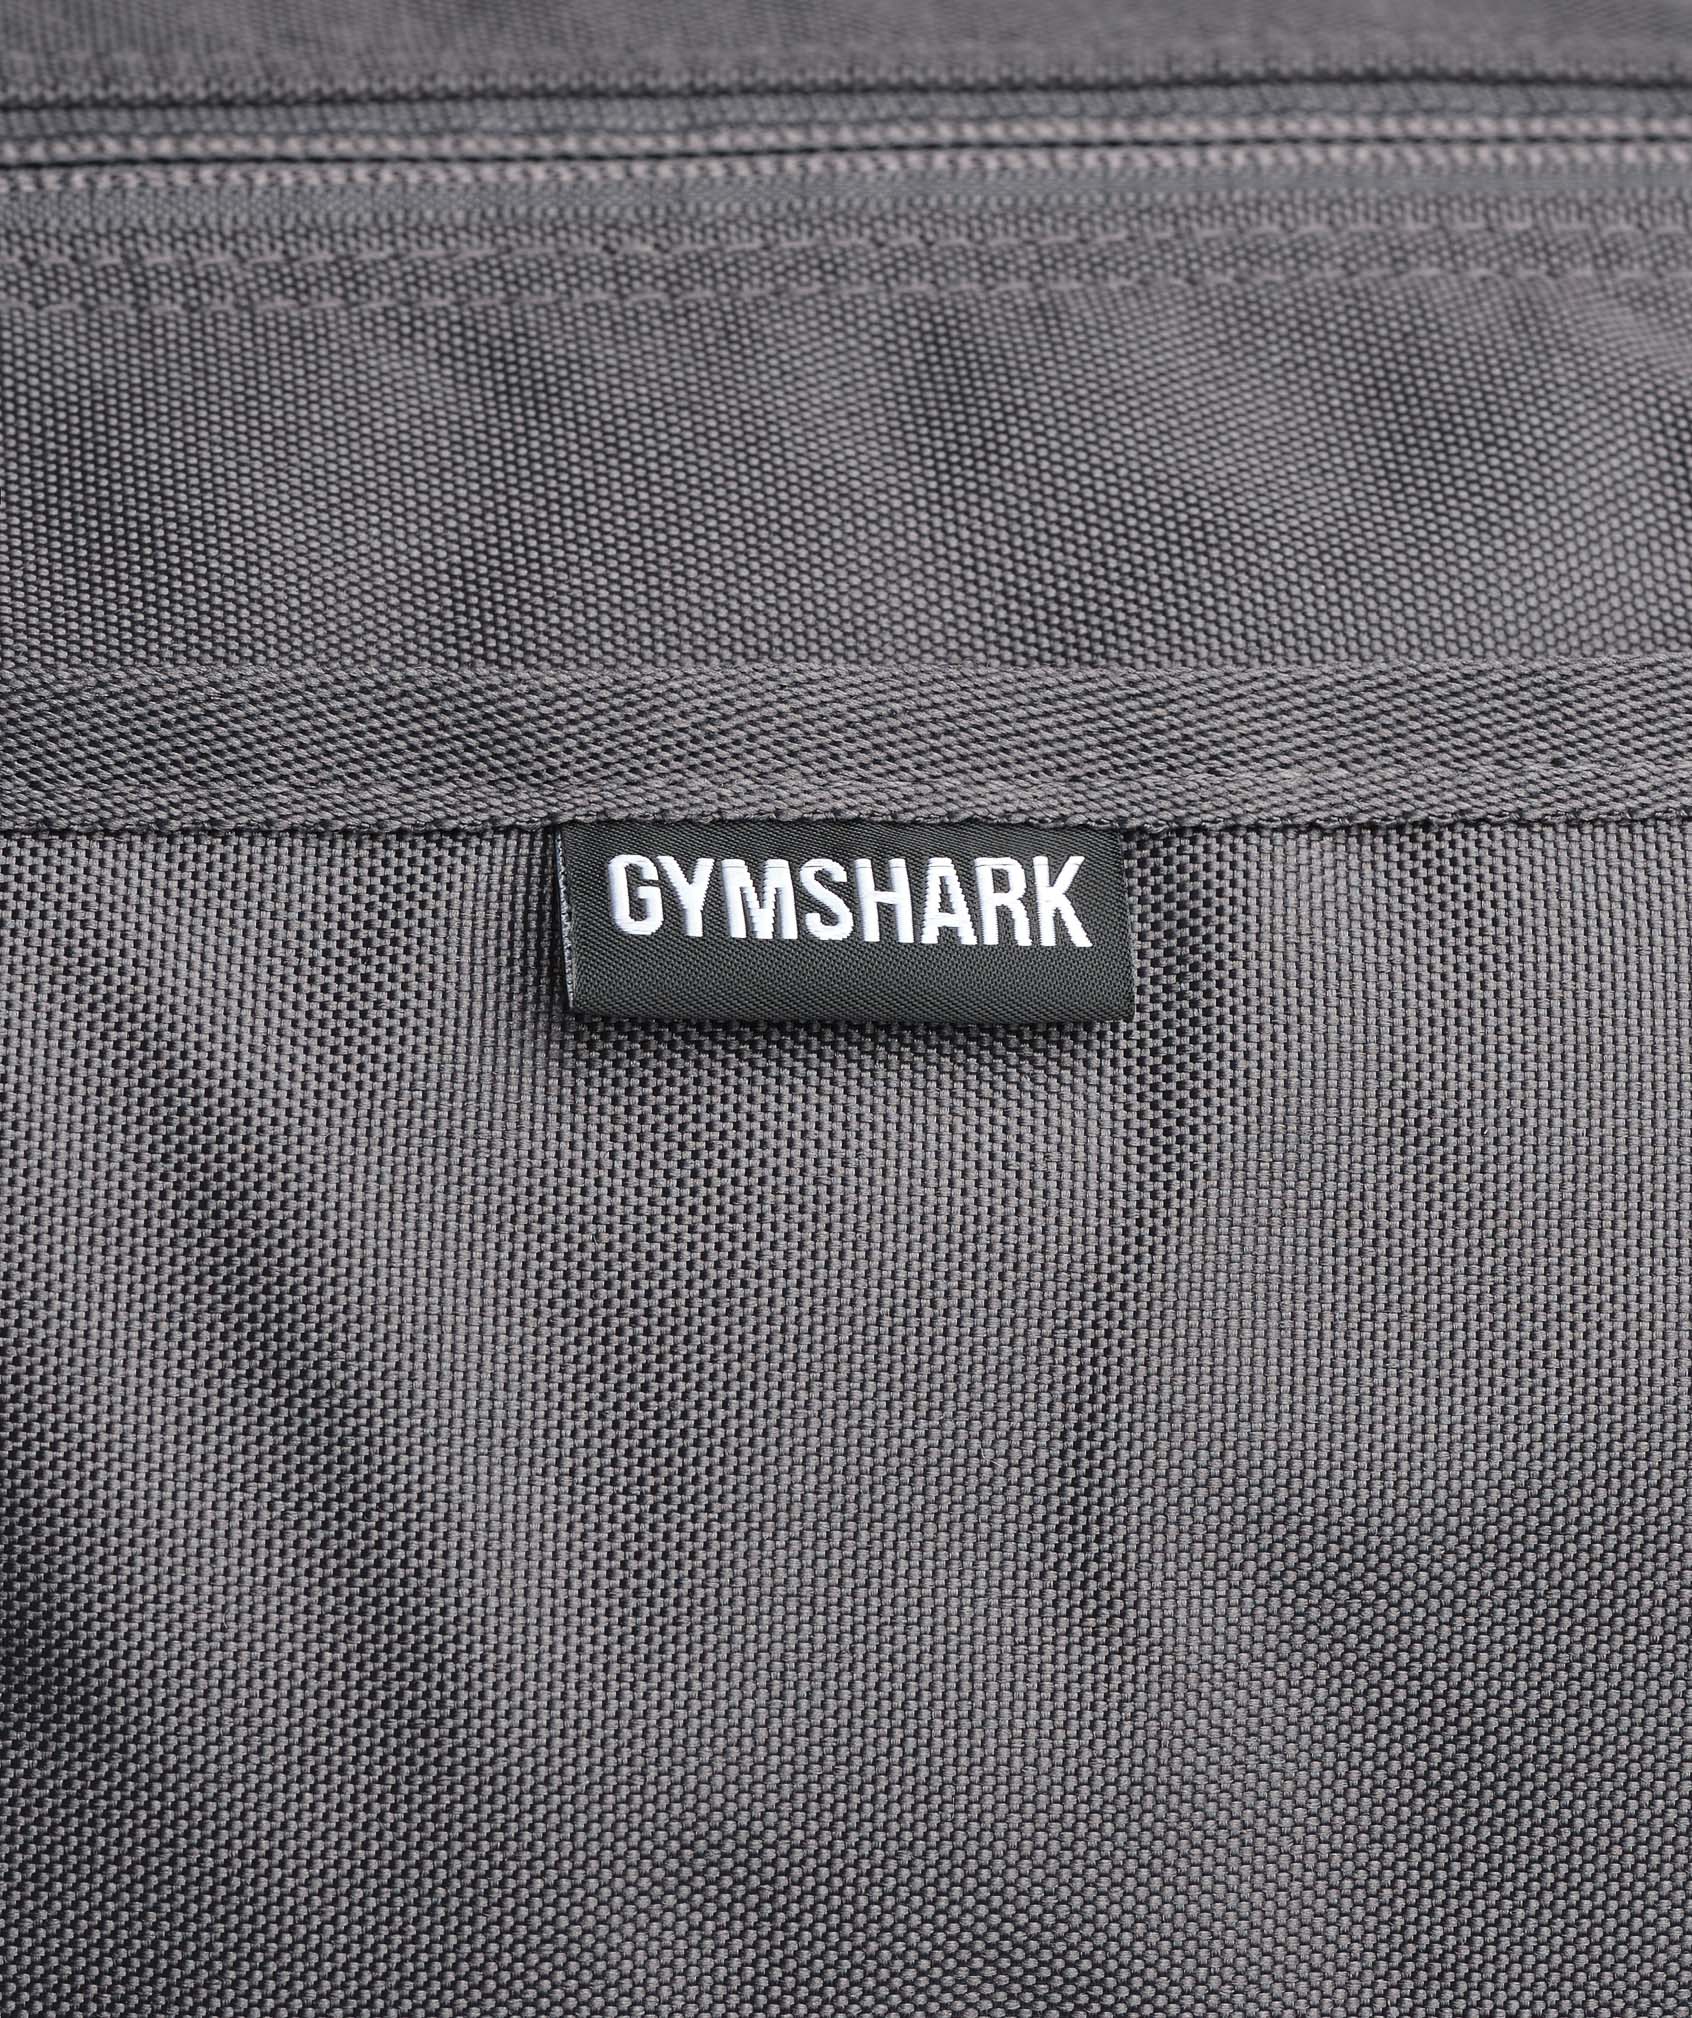 Sharkhead Holdall in Graphite Grey - view 3